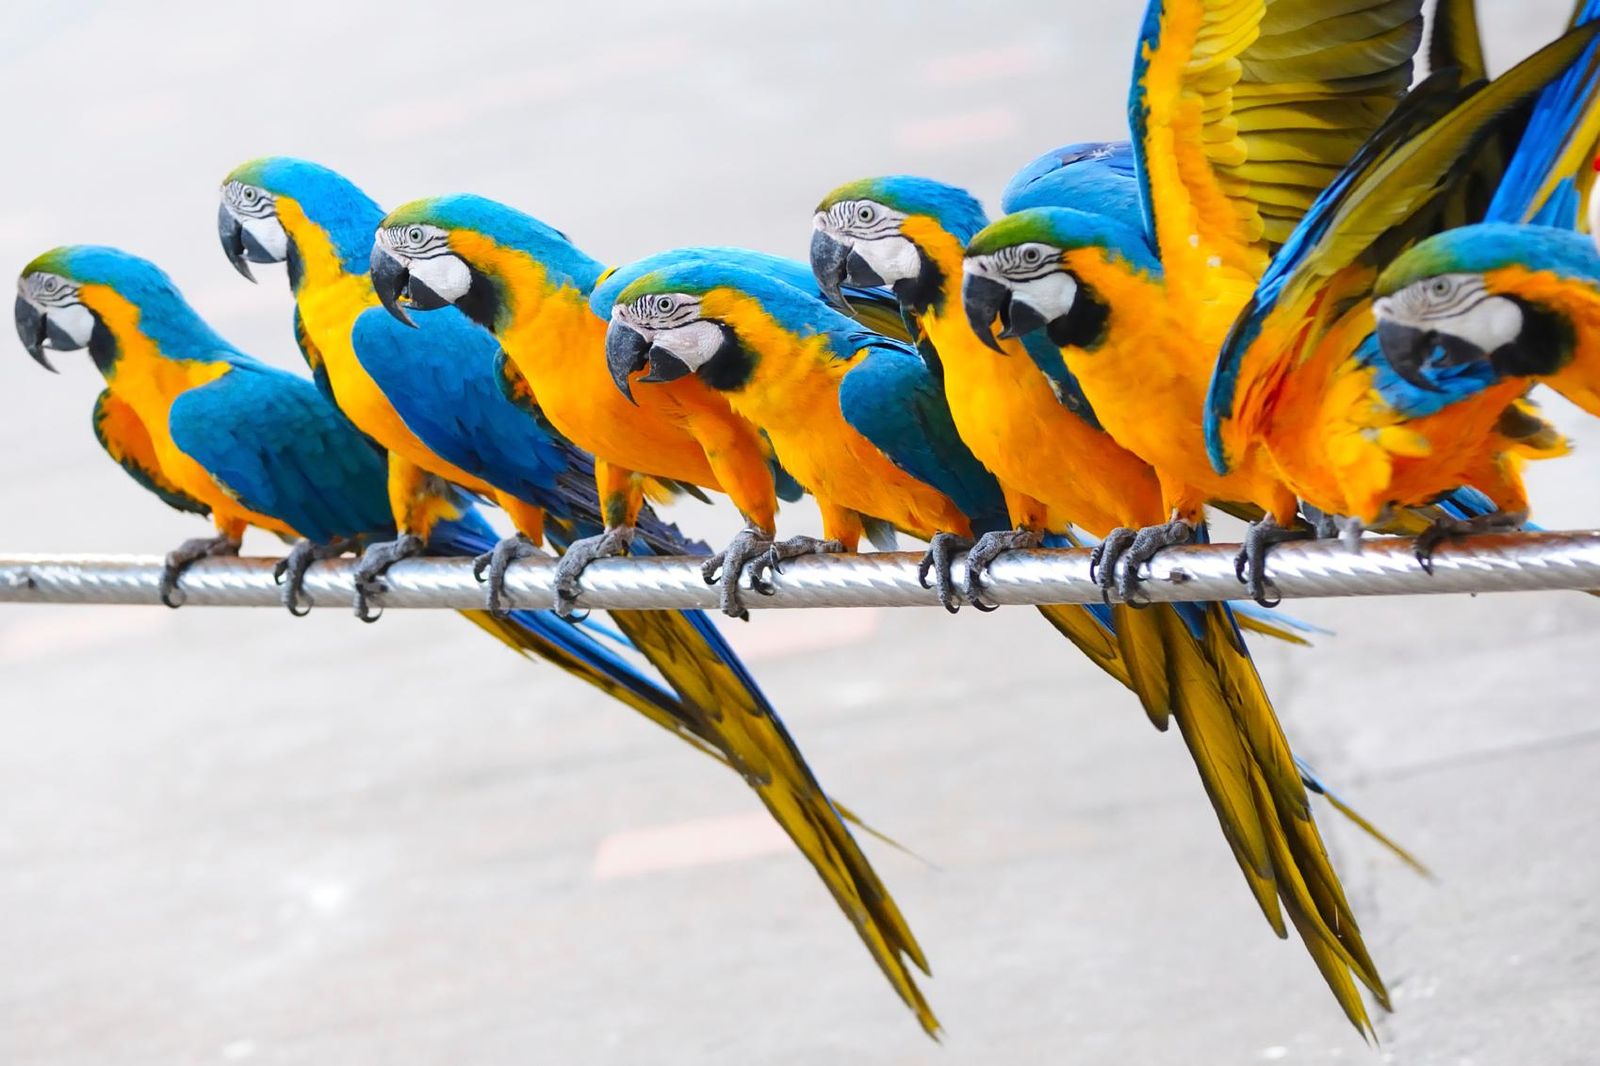 14 Fun Facts About Parrots | Science| Smithsonian Magazine